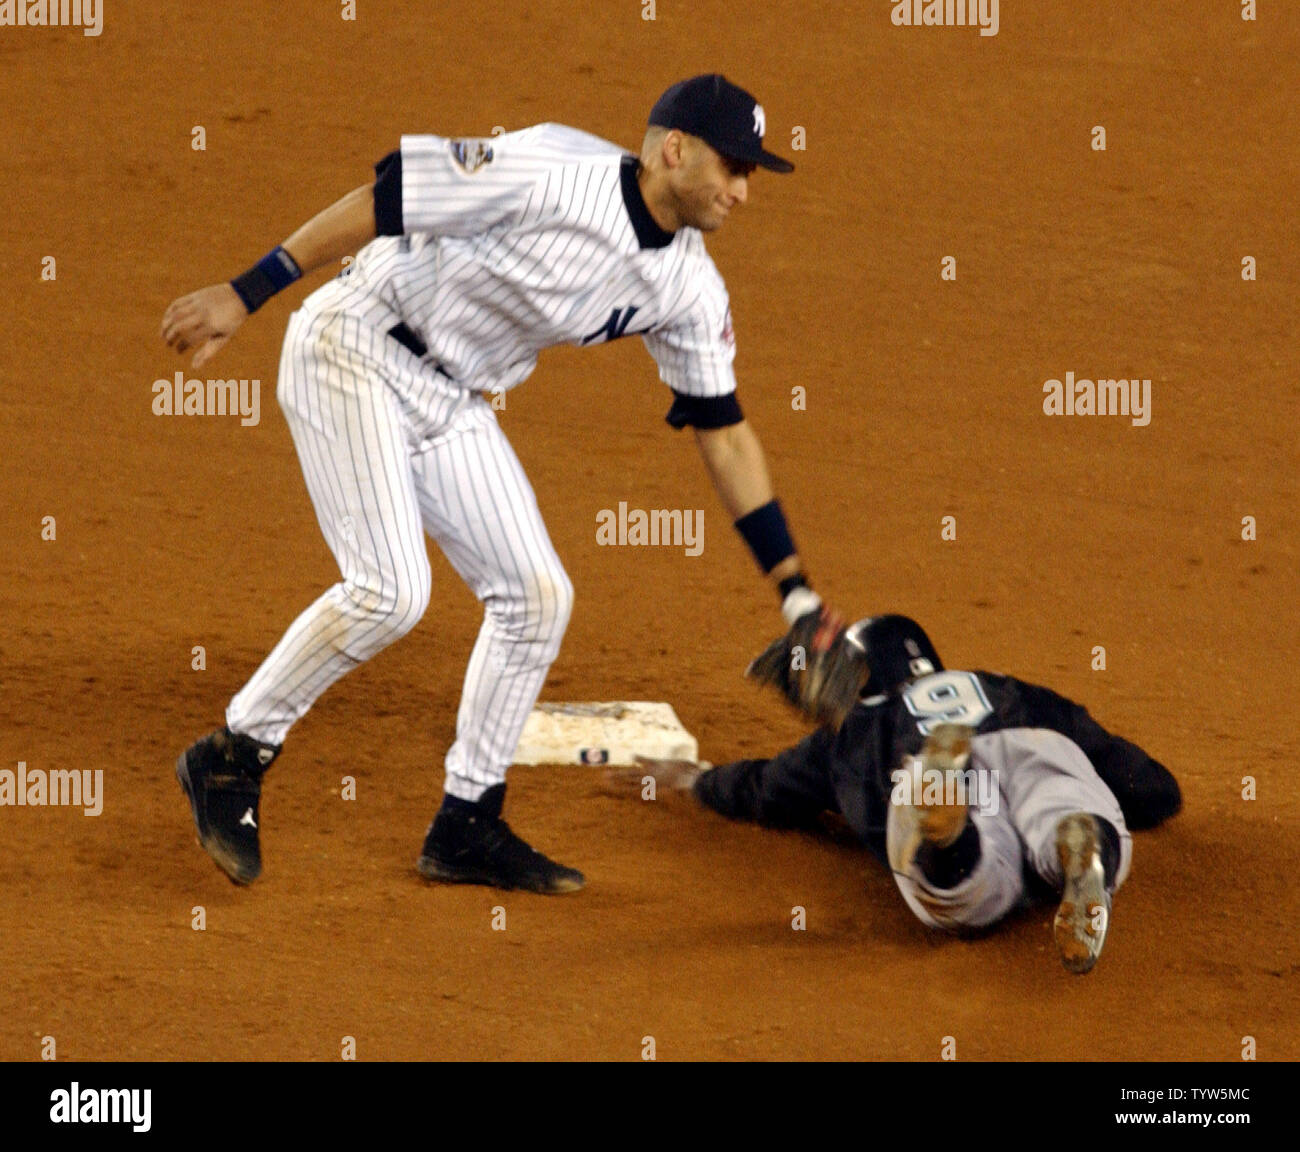 The Florida Marlins' Juan Pierre steals second base as the New York Yankees' Derek Jeter applies the tag in Game 1 of the World Series at Yankee Stadium on October 18, 2003. The Marlins won 3-2.  (UPI/Roger L. Wollenberg) Stock Photo